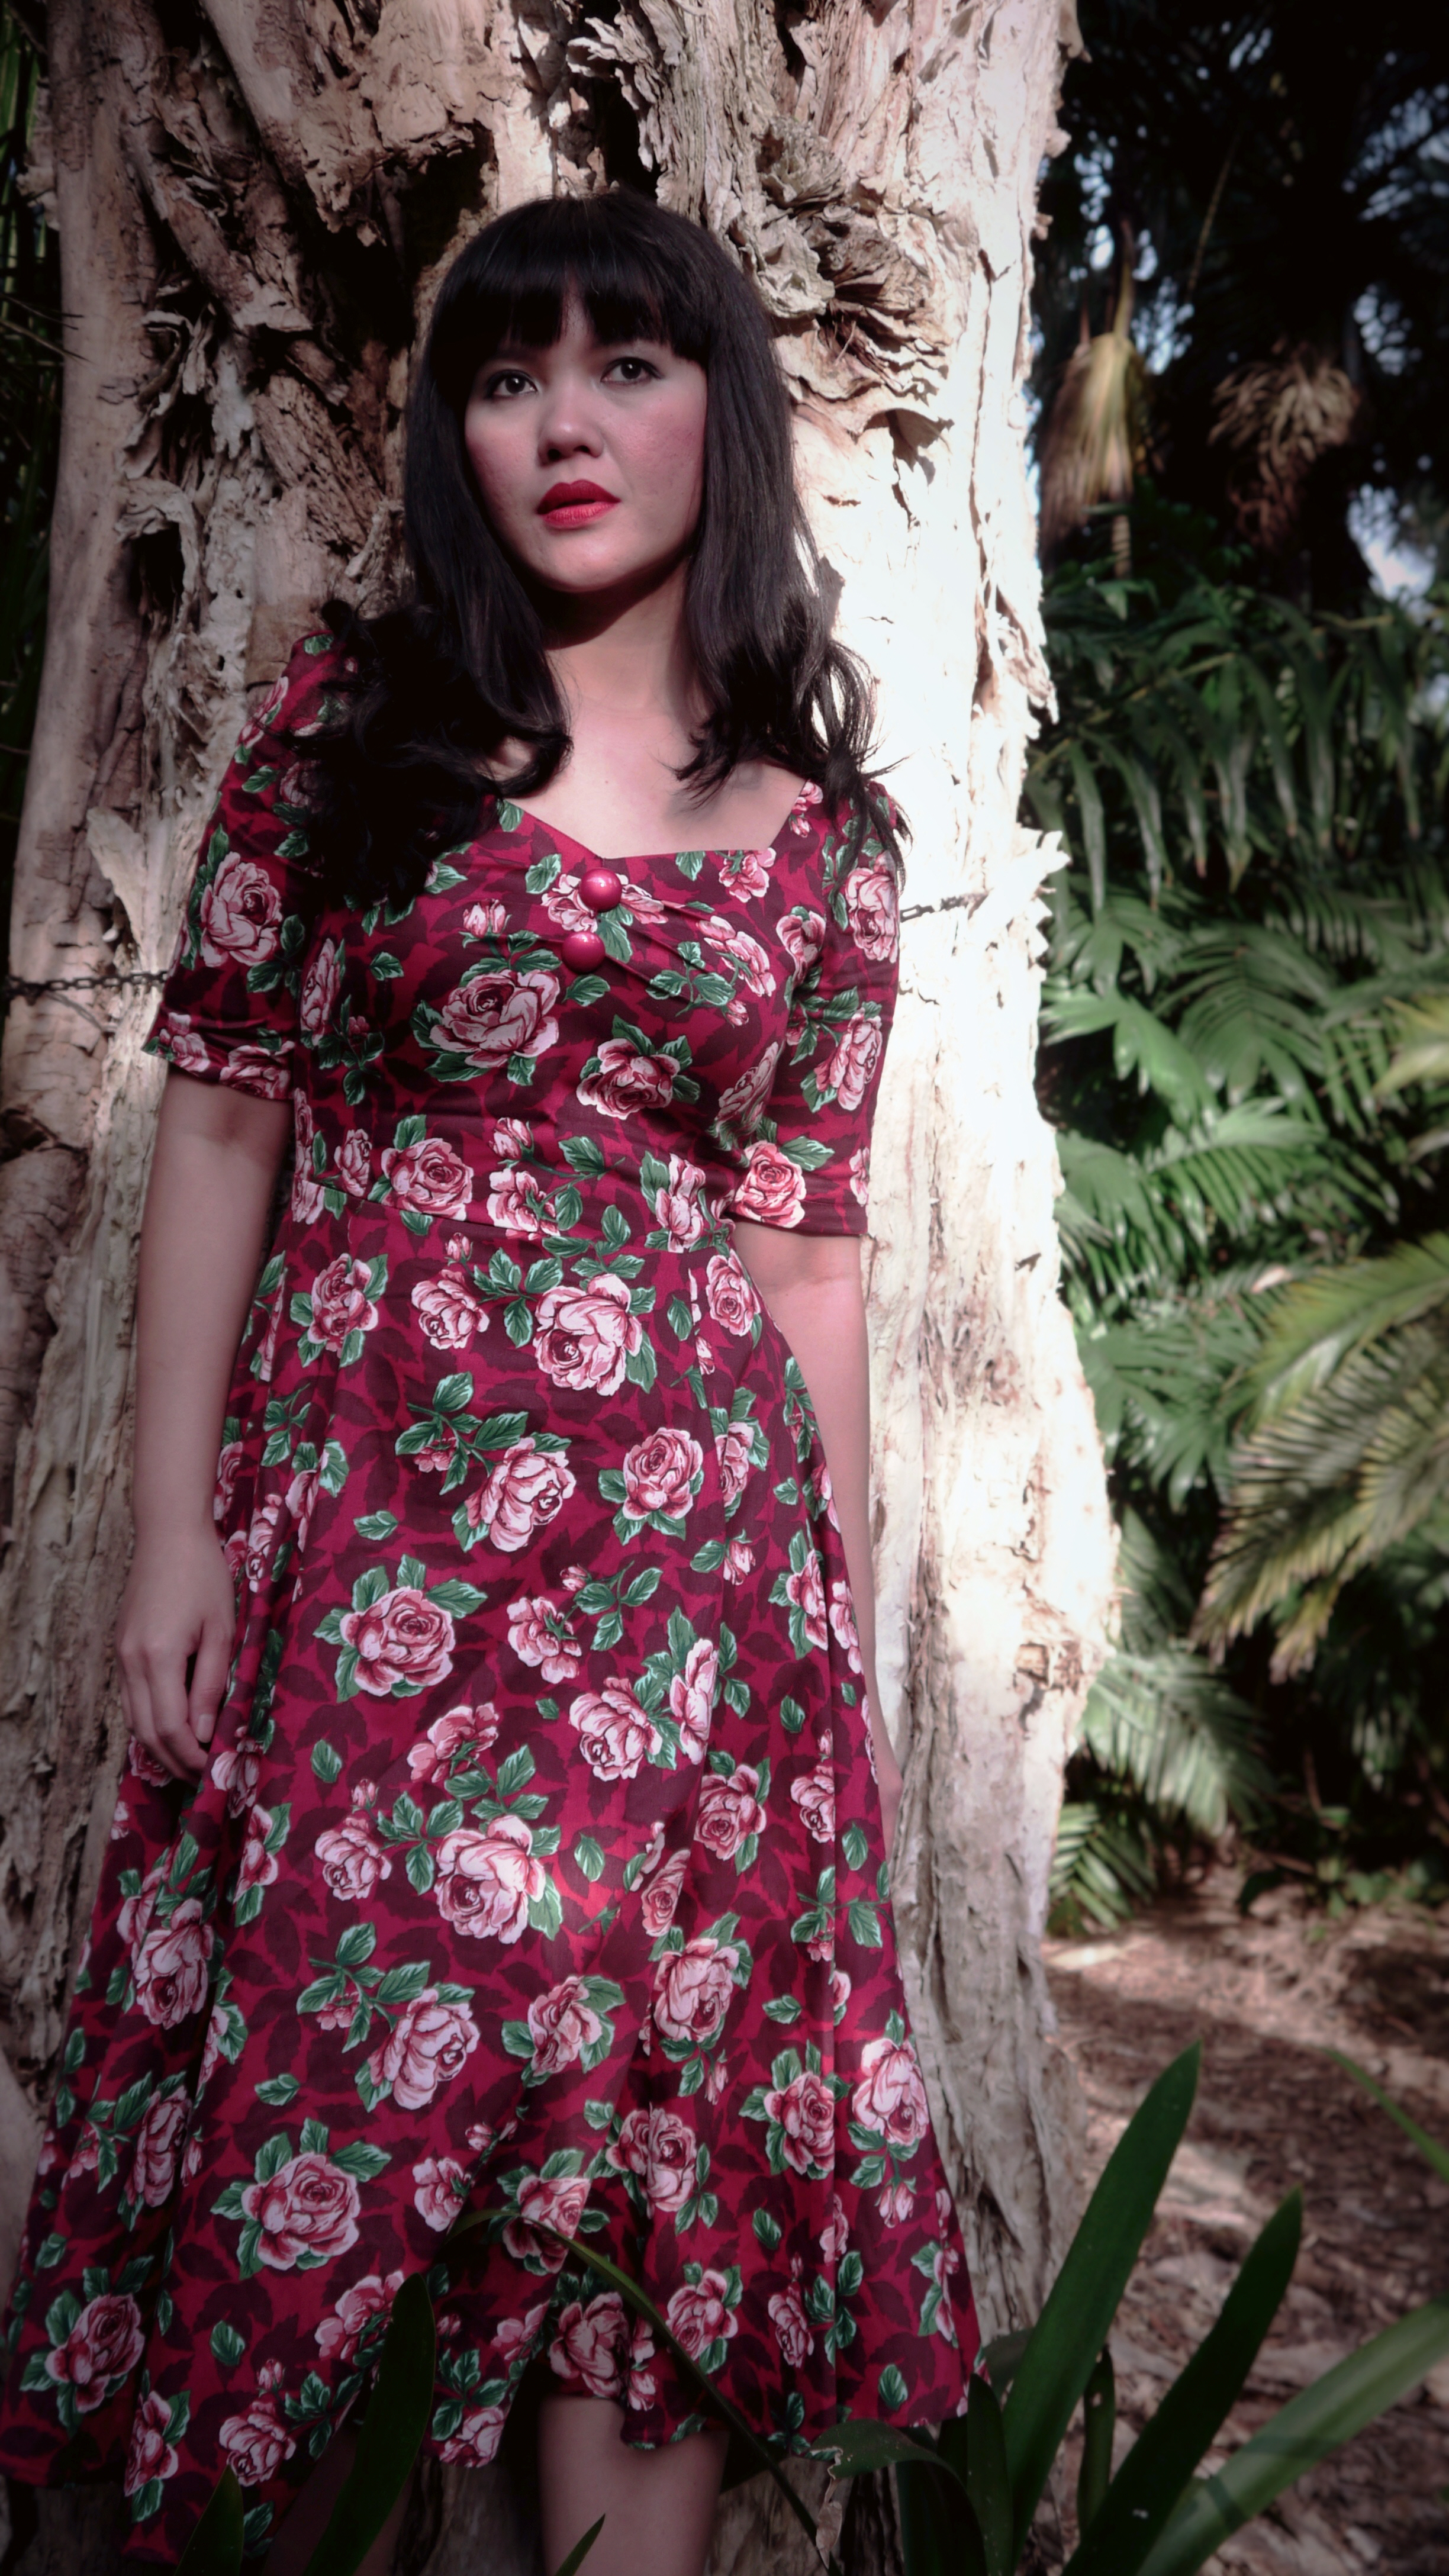 Photo of Intan Paramaditha, standing outdoors against a tree trunk. She is an Indonesian woman with long, dark hair and a fringe, wearing a knee-length red floral dress.